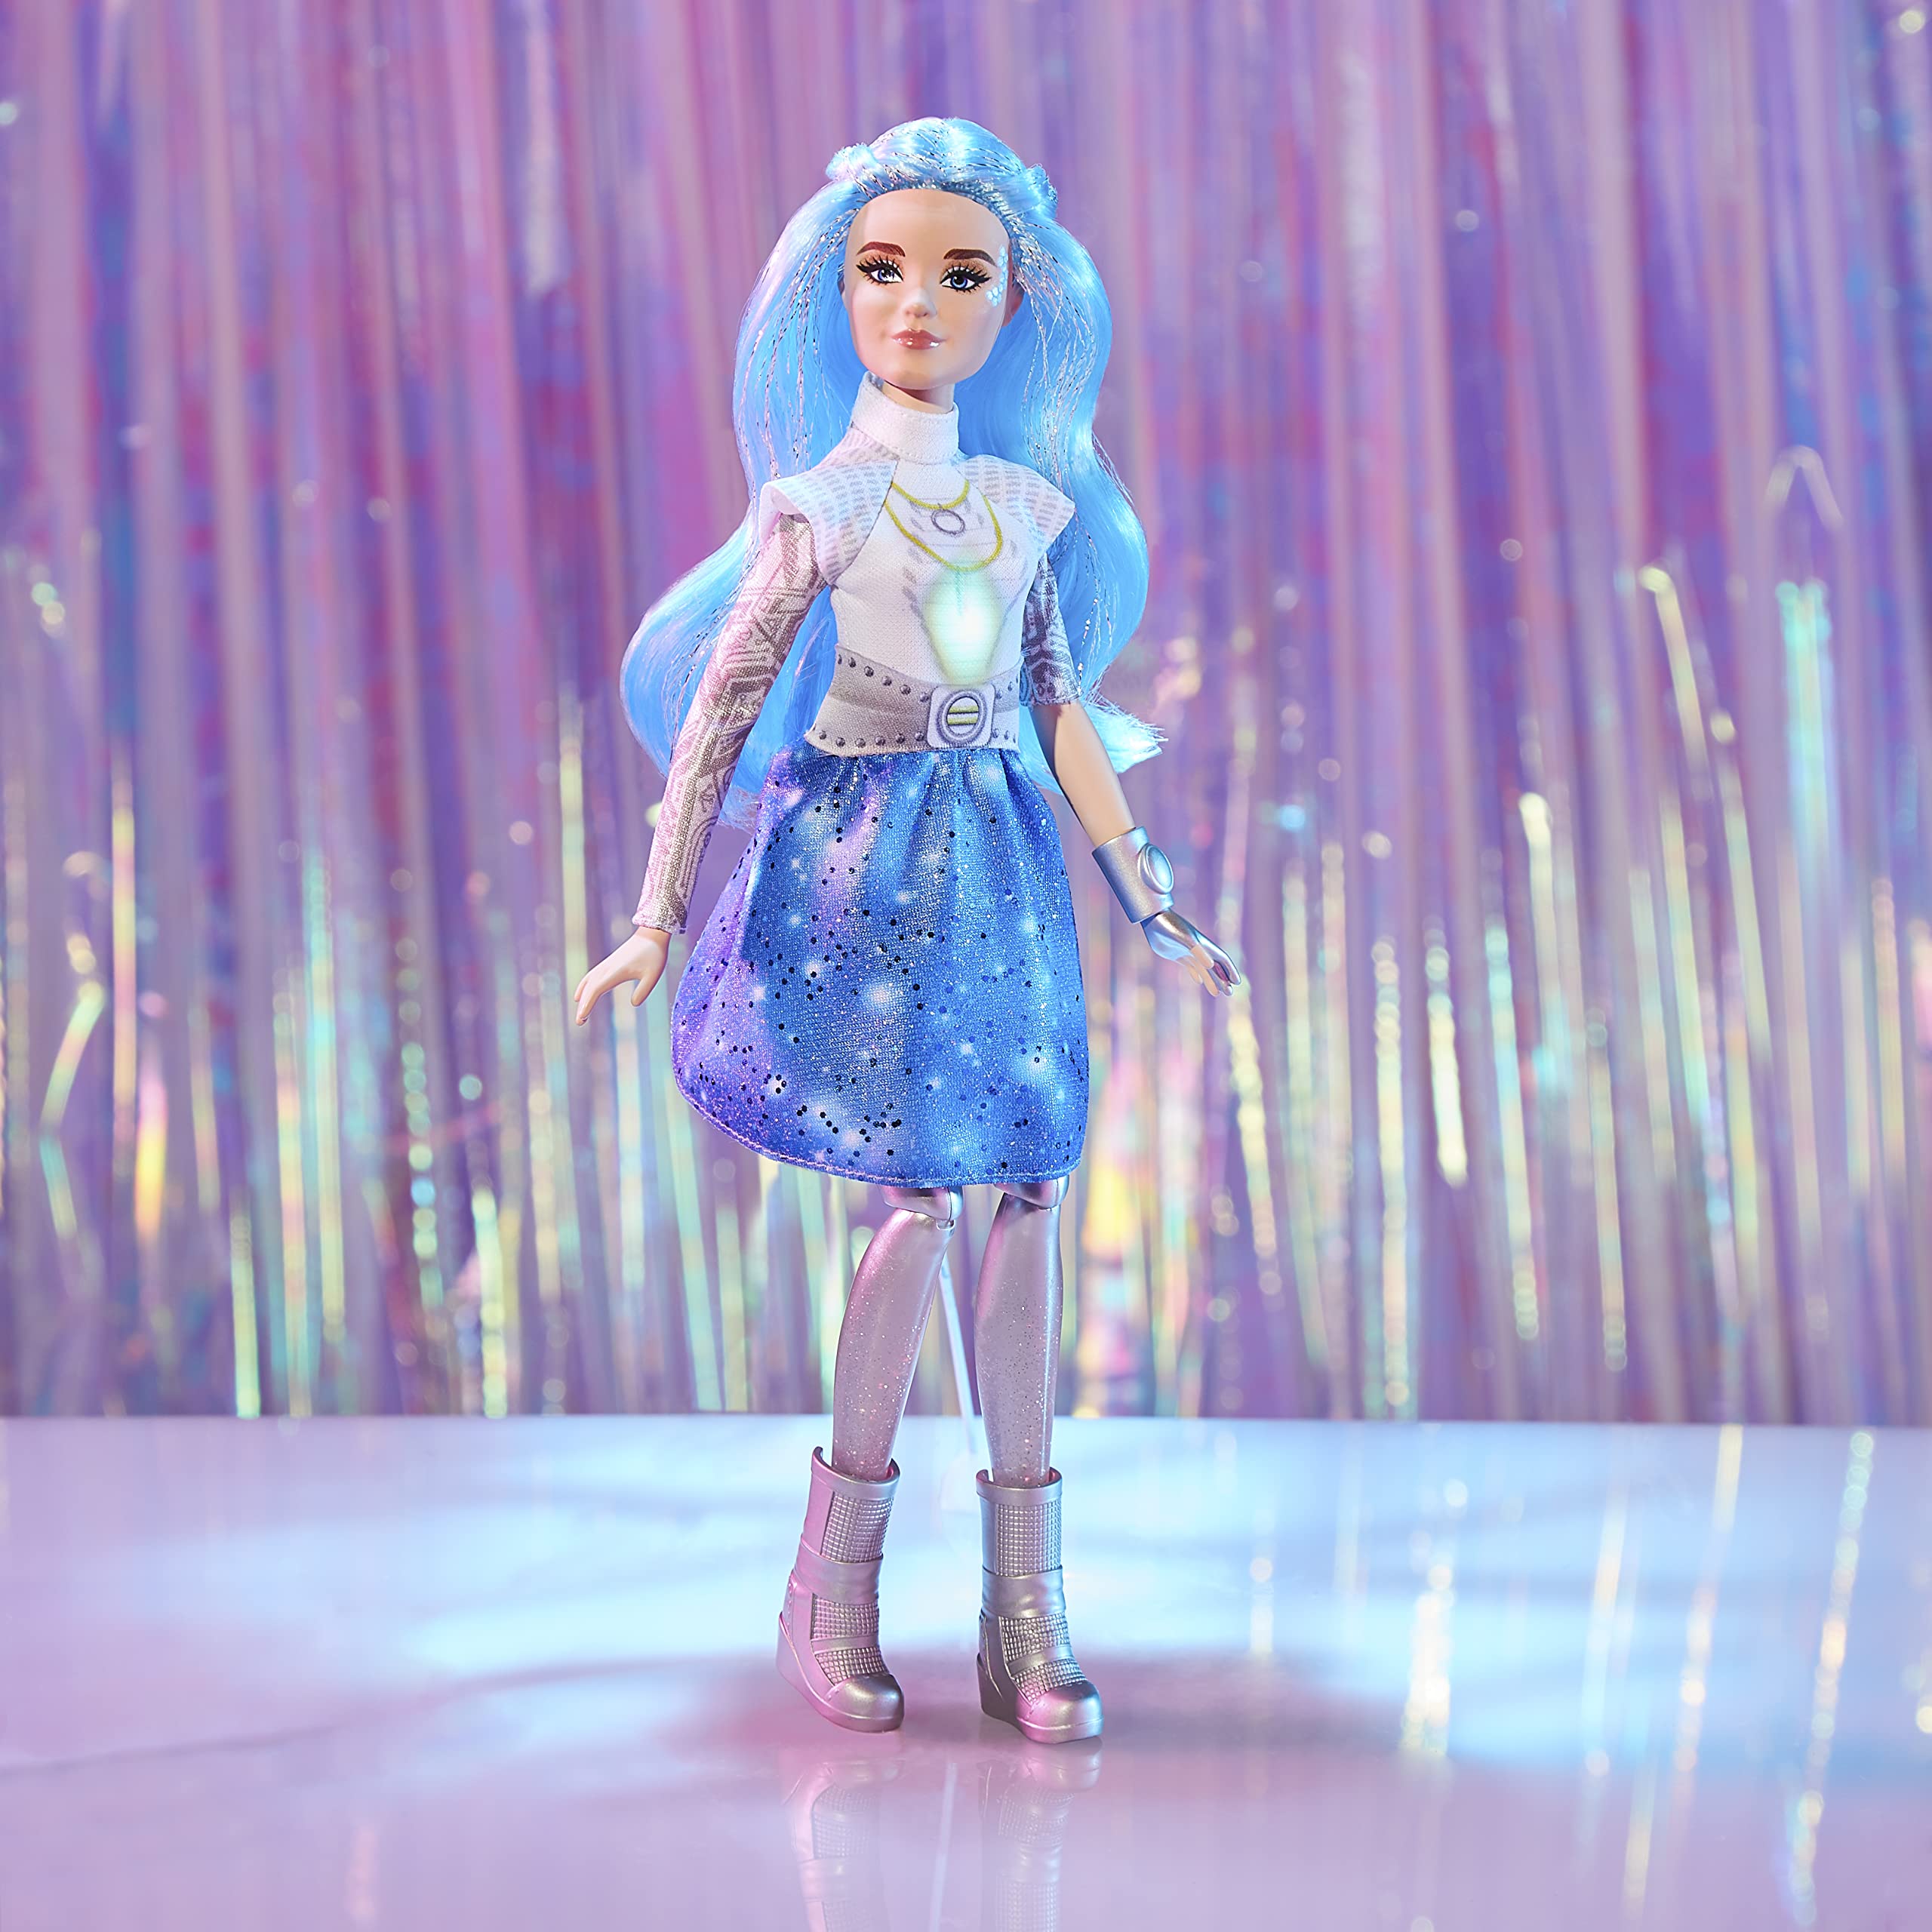 Disney Princess Zombies 3 Singing Addison Fashion Doll - Light-Up Doll with Music and Singing, Outfit and Accessories. Toy for Kids Age 6+